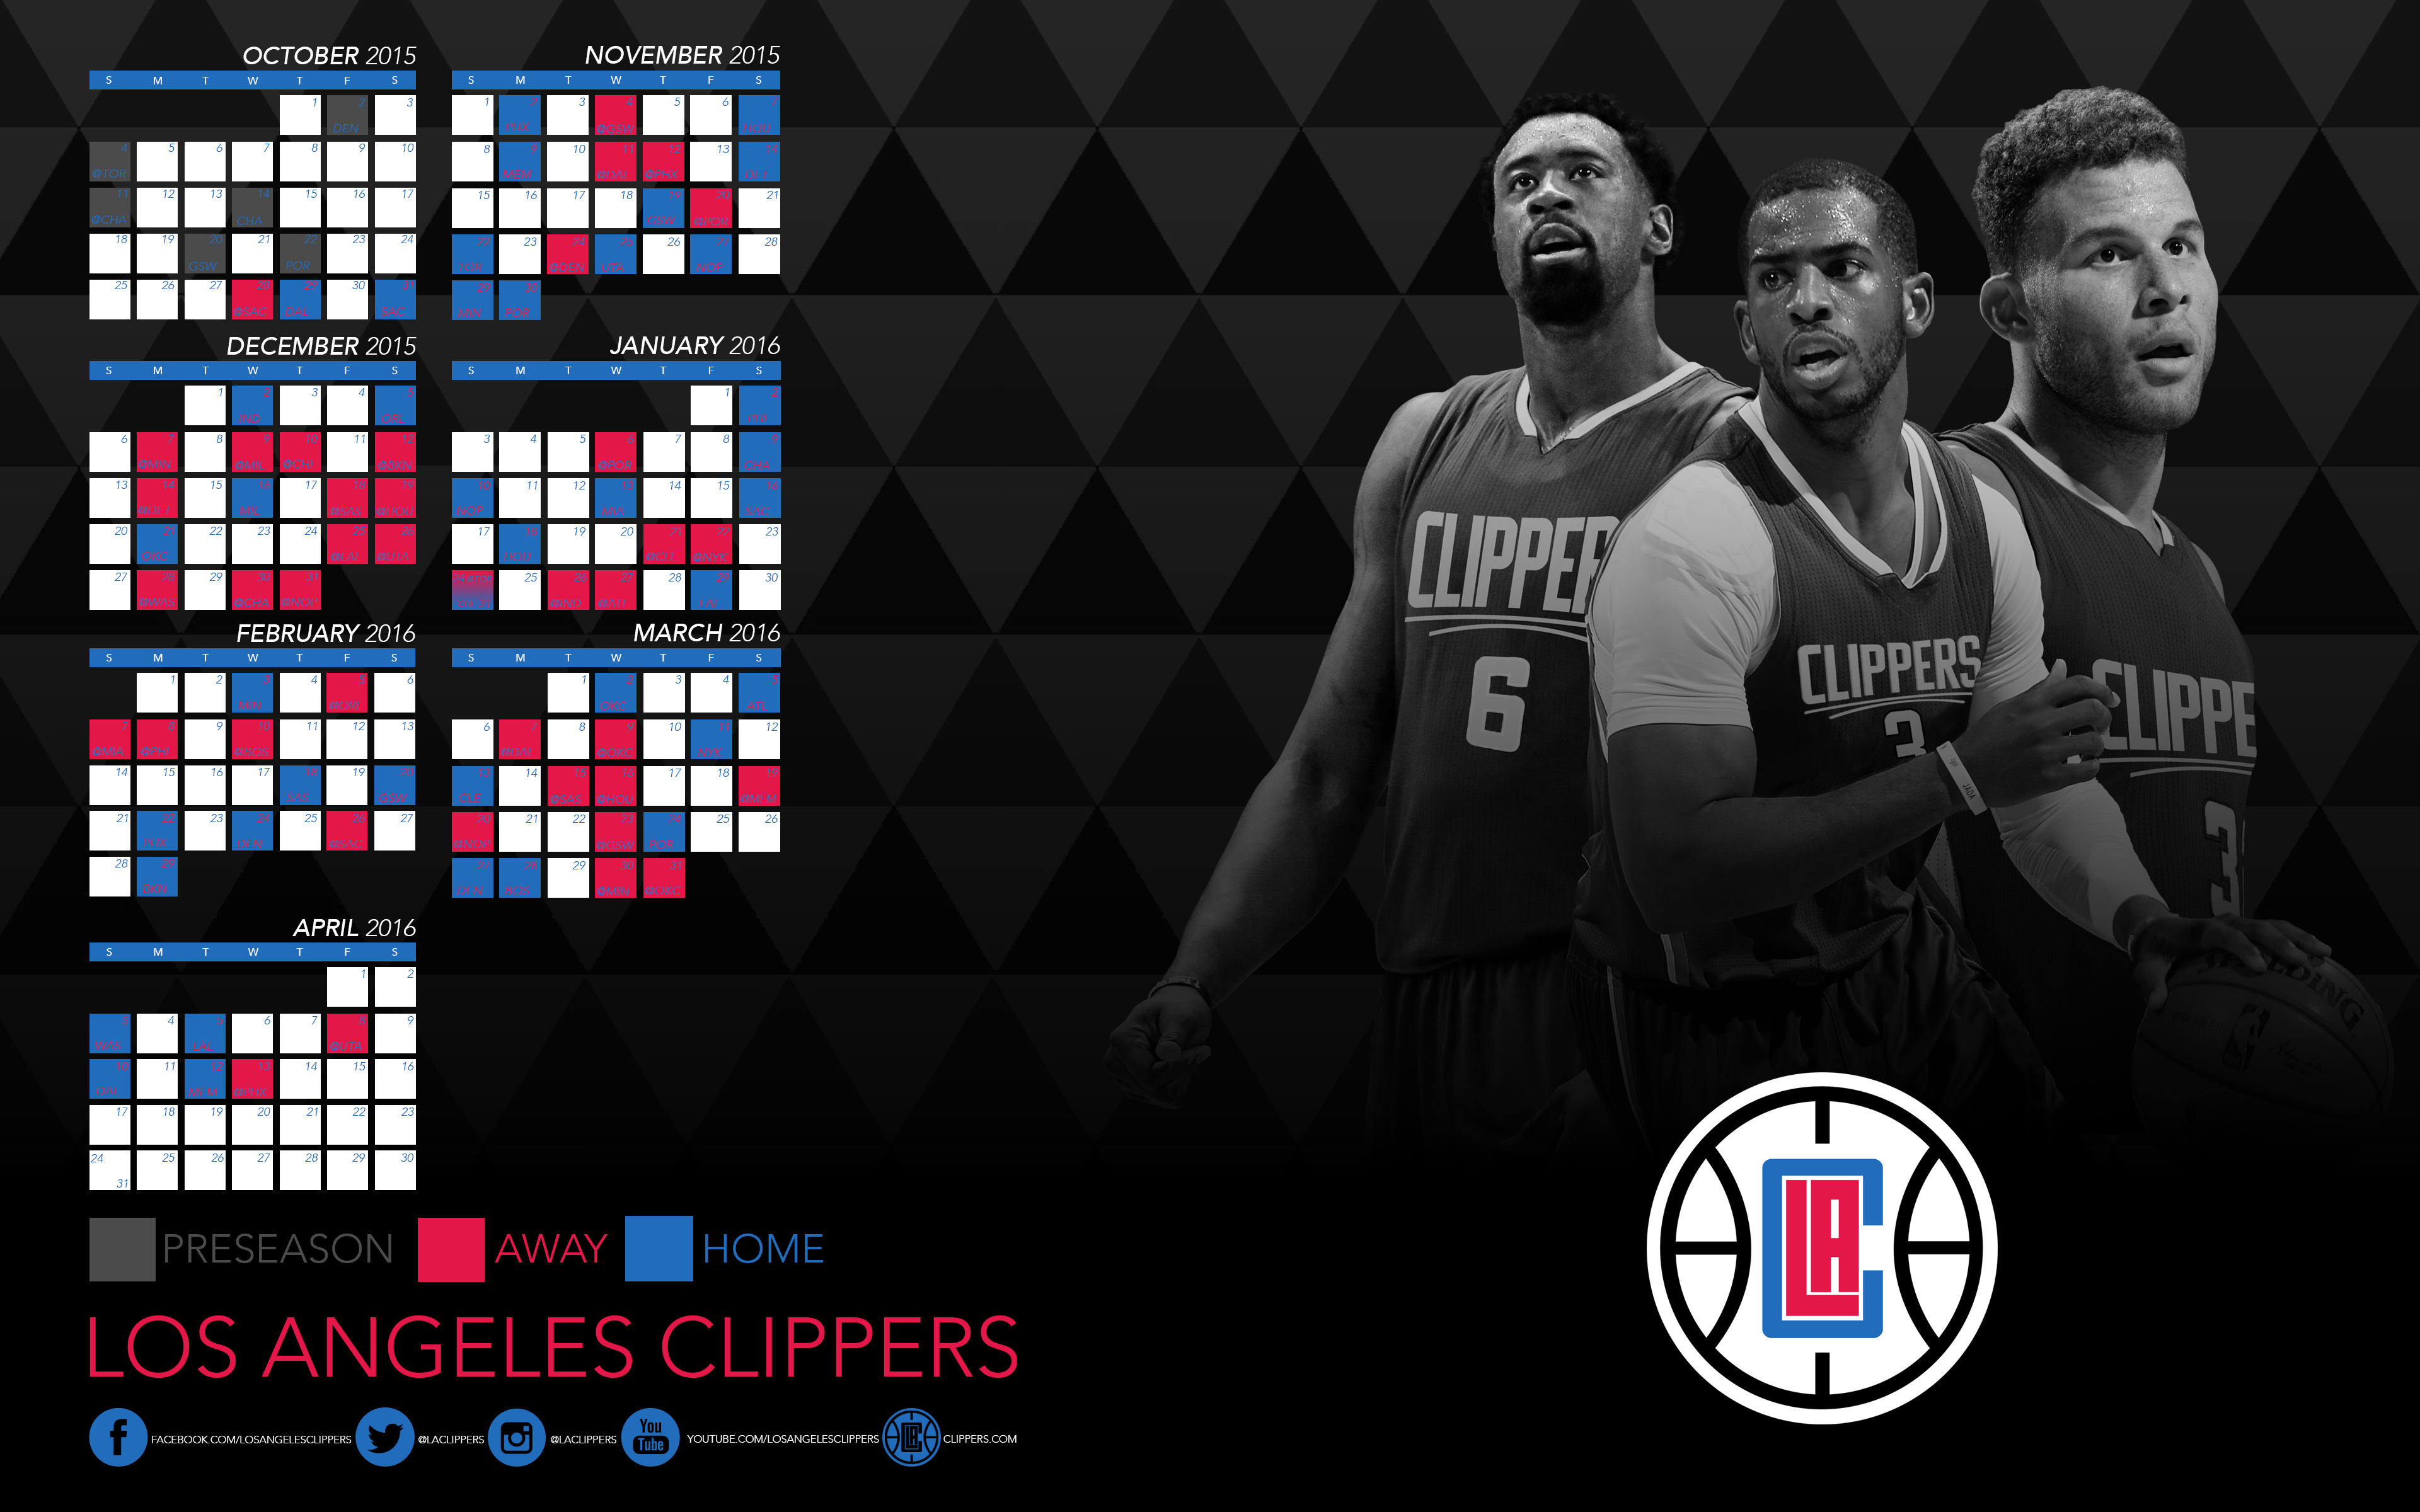 Los Angeles Clippers Schedule Wallpaper By Lukemphotography